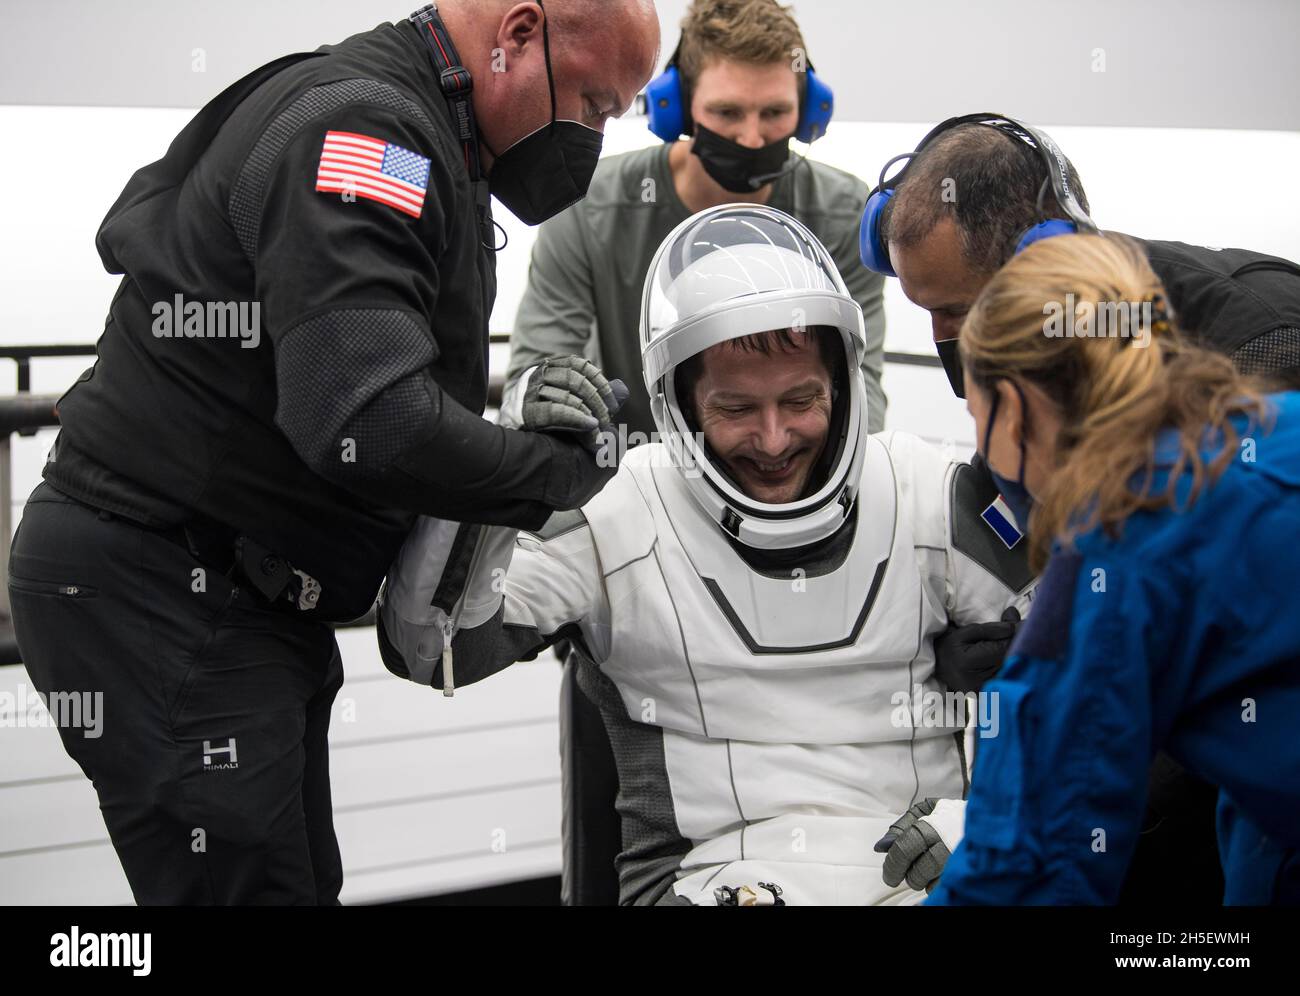 ESA (European Space Agency) astronaut Thomas Pesquet is helped out of the SpaceX Crew Dragon Endeavour spacecraft onboard the SpaceX GO Navigator recovery ship after he and NASA astronauts Shane Kimbrough and Megan McArthur, and Japan Aerospace Exploration Agency (JAXA) astronaut Aki Hoshide landed in the Gulf of Mexico off the coast of Pensacola, Florida, Monday, Nov. 8, 2021. NASA's SpaceX Crew-2 mission is the second operational mission of the SpaceX Crew Dragon spacecraft and Falcon 9 rocket to the International Space Station as part of the agency's Commercial Crew Program. Mandatory Credi Stock Photo